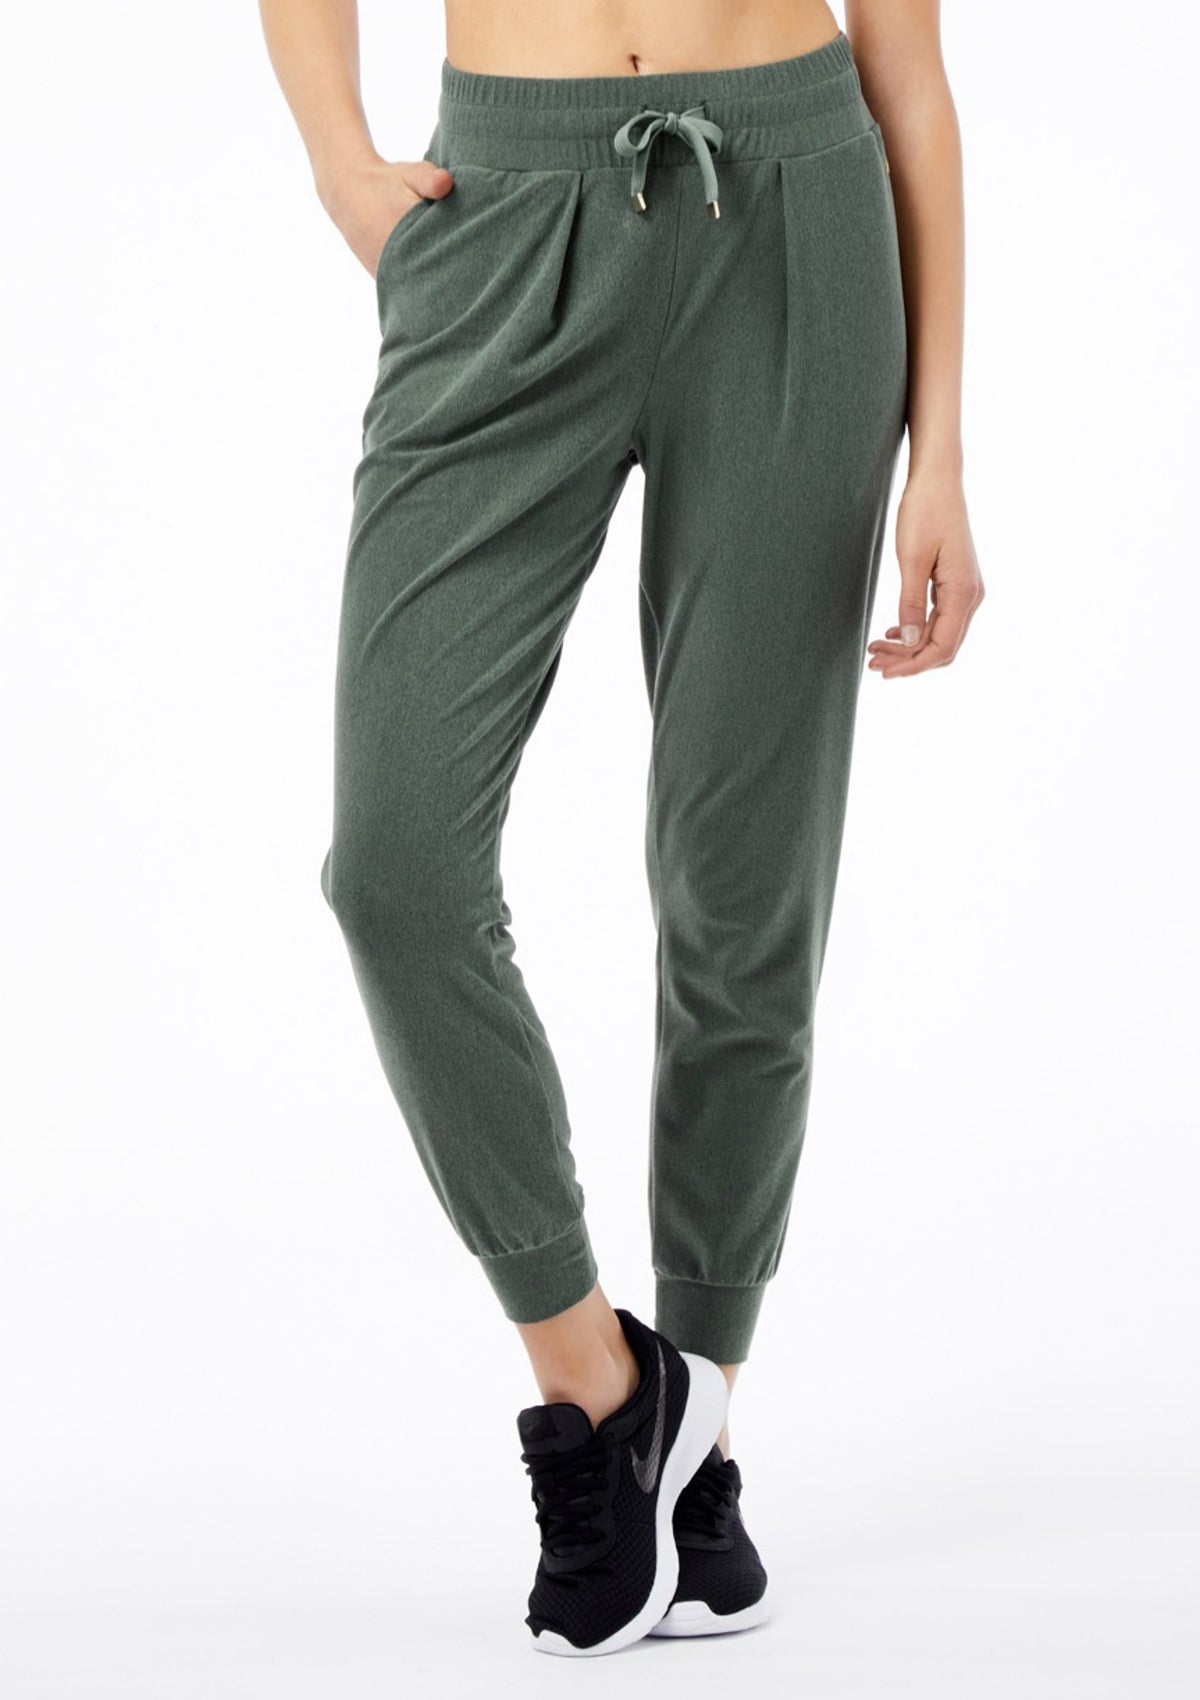 LUXE PLUSH Track Pants vetiver green